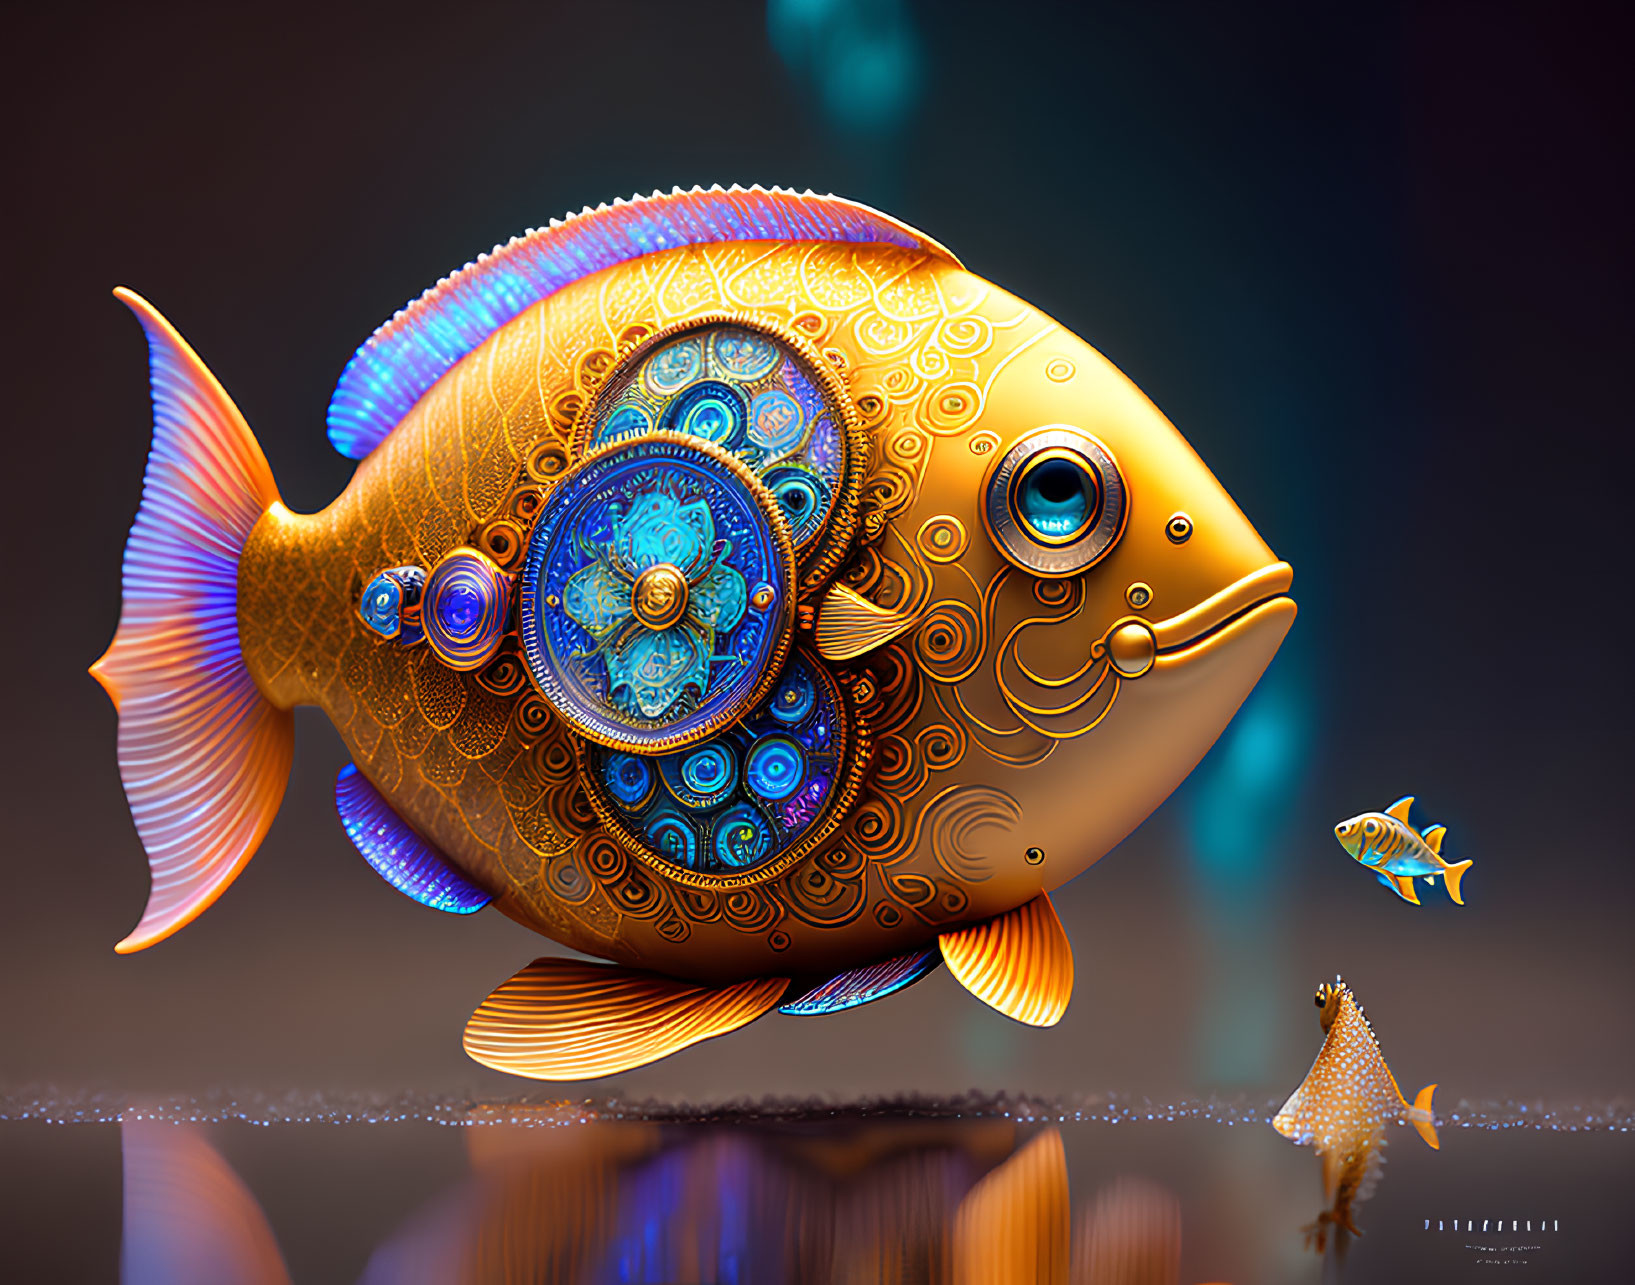 Gold and Blue Ornate Fish Digital Artwork with Jewels and Reflection